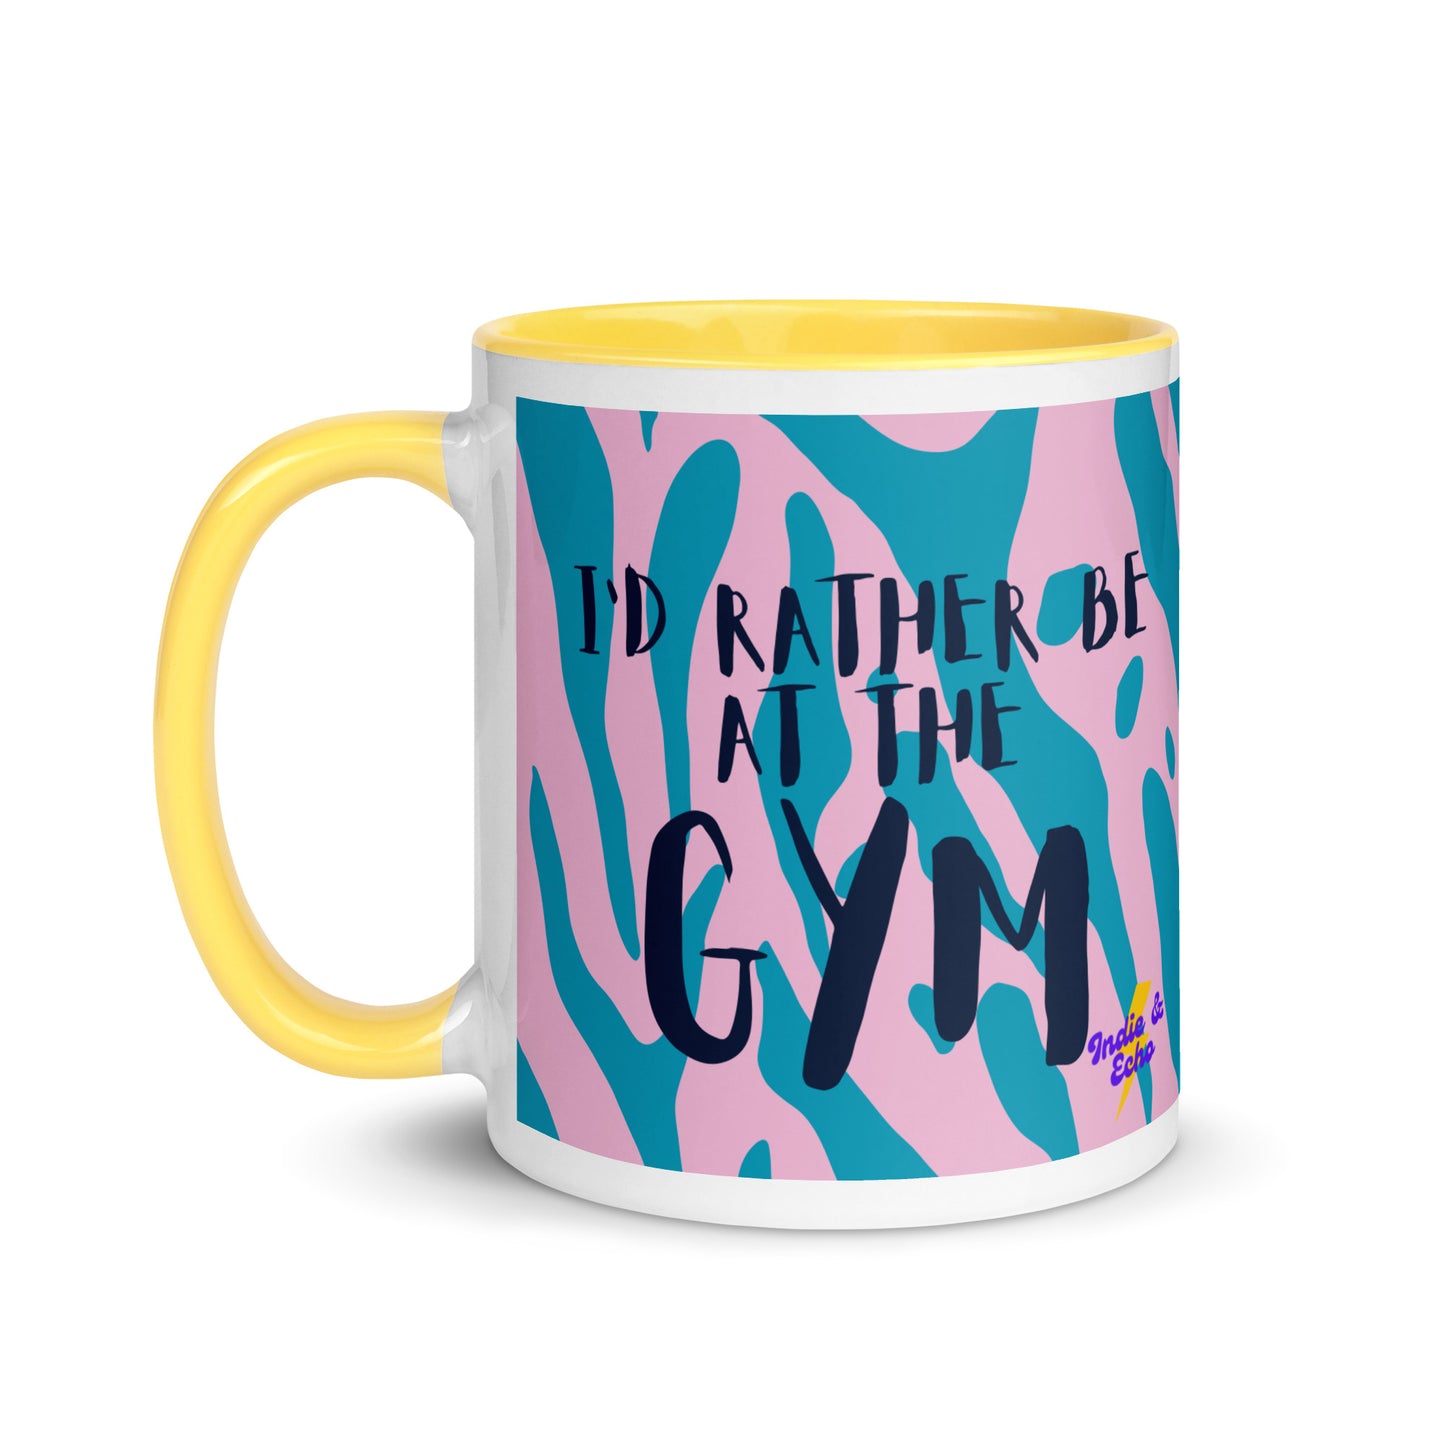 Yellow handled mug with I'd rather be at the gym written on it, across a blue and pink animal print background. A gift for someone who loves the gym.